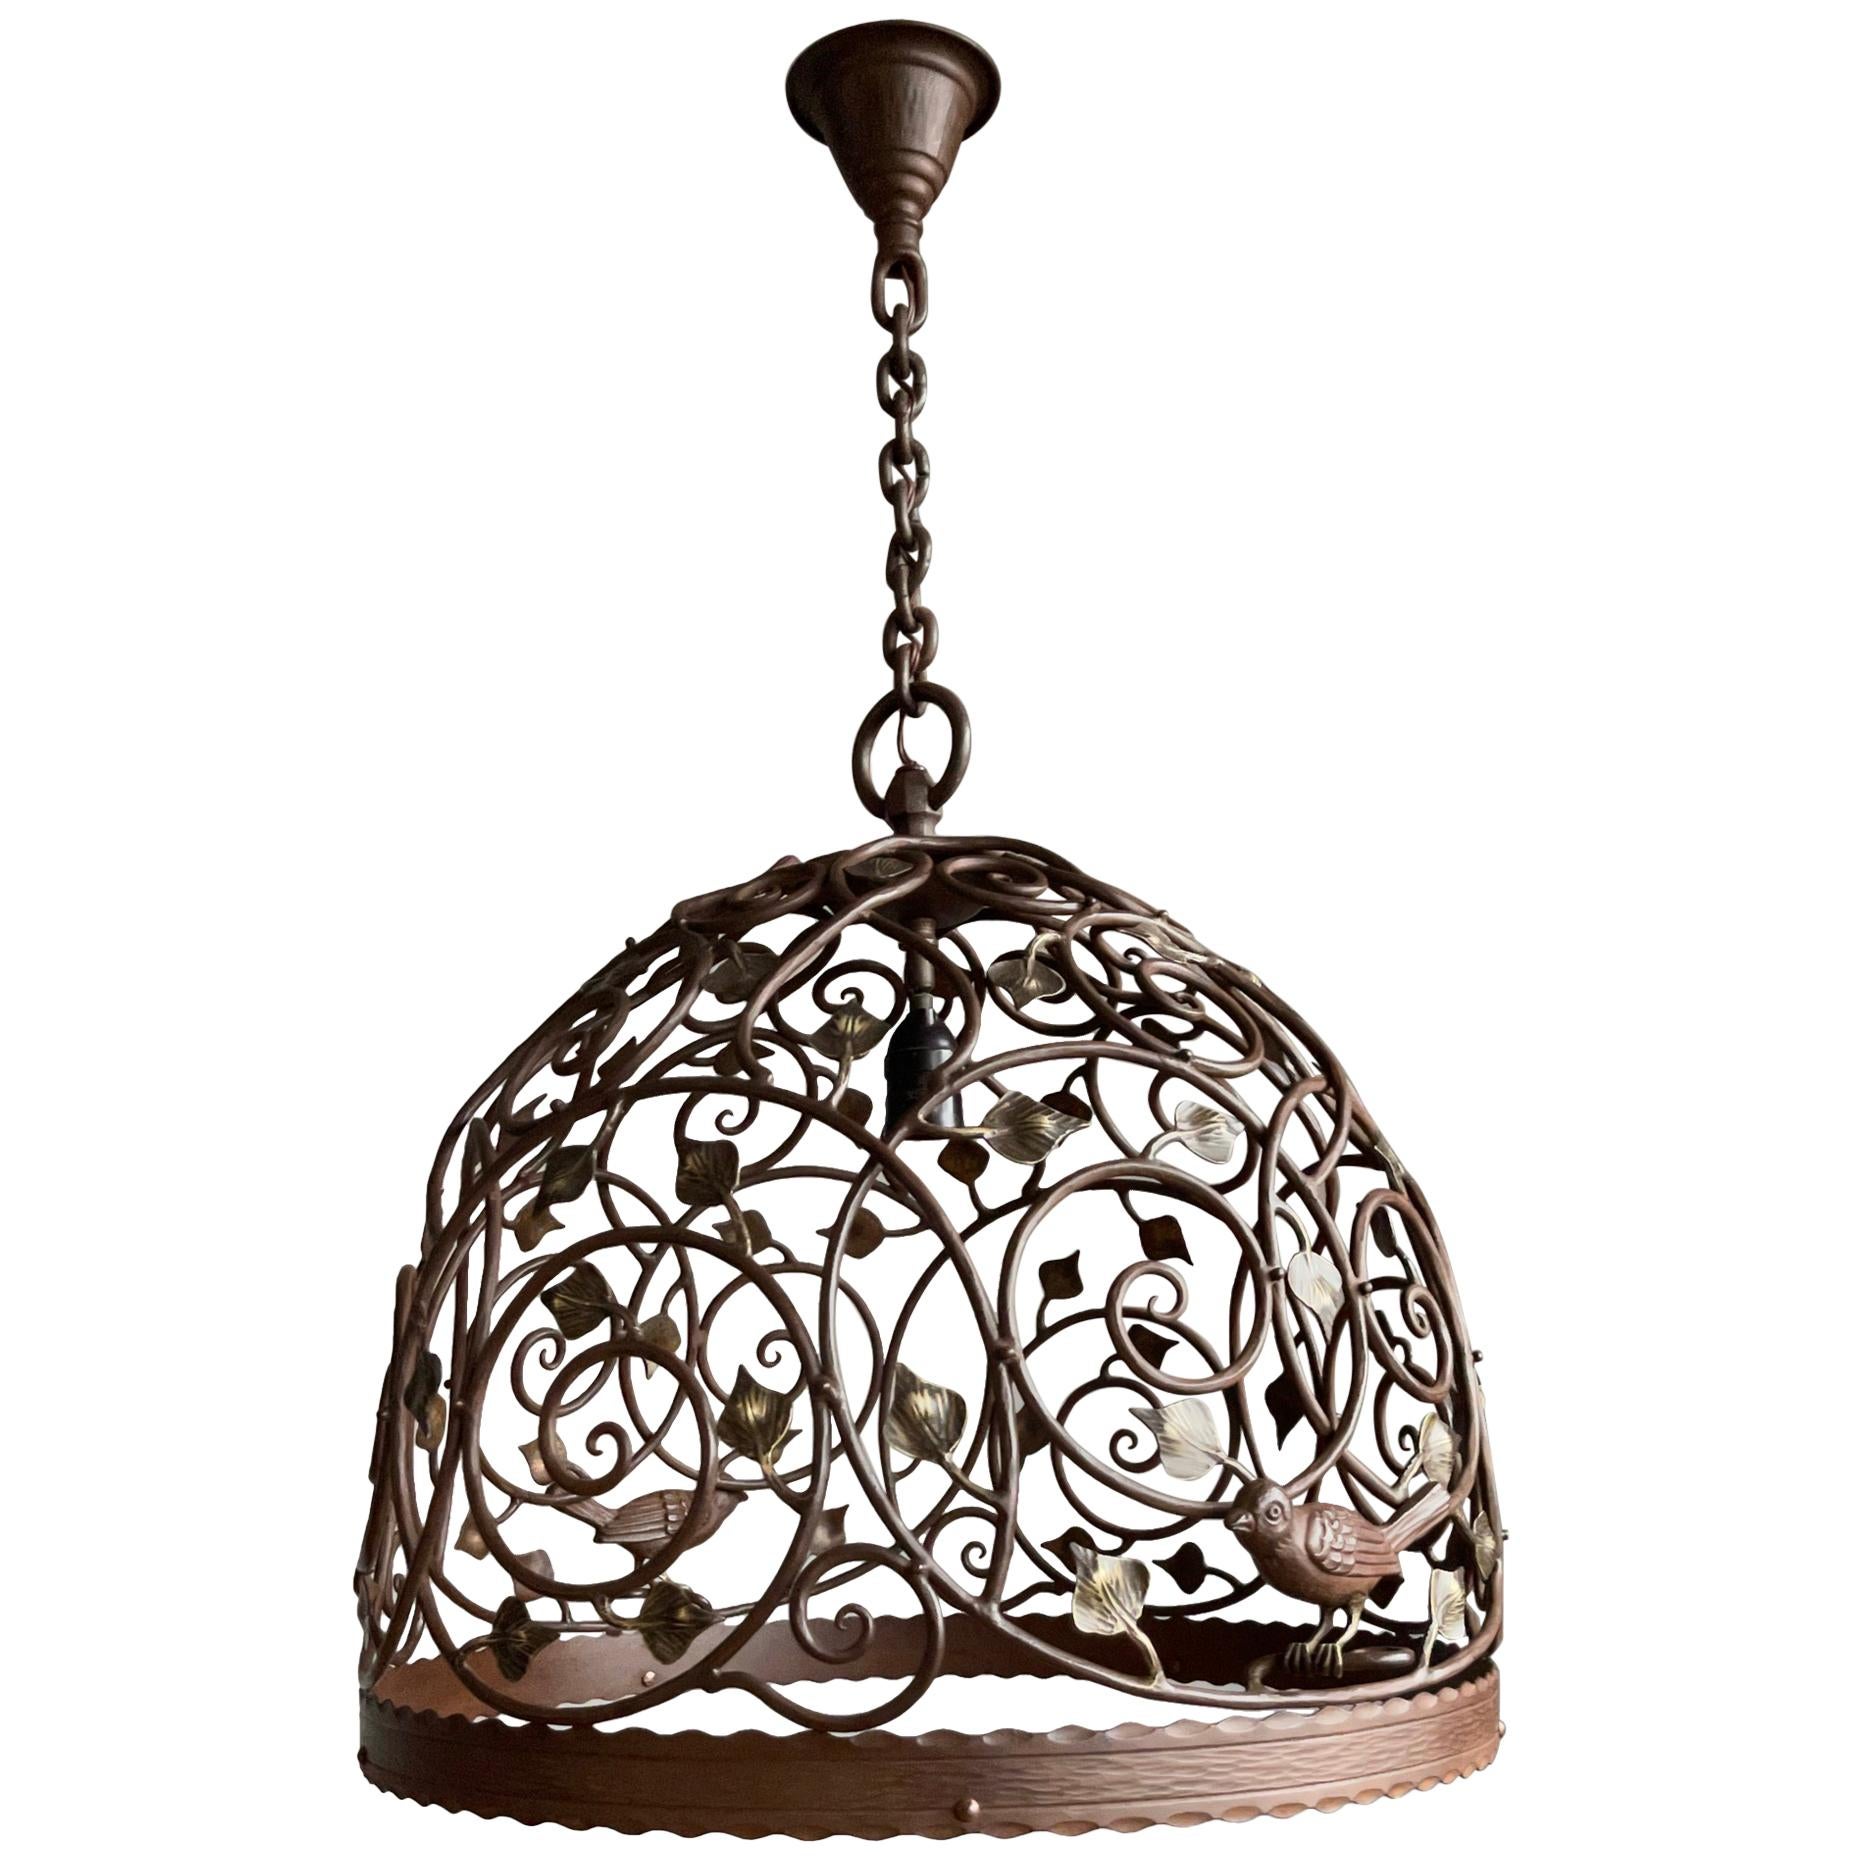 Beautiful Large Arts and Crafts Wrought Iron & Bronze Pendant Light / Chandelier